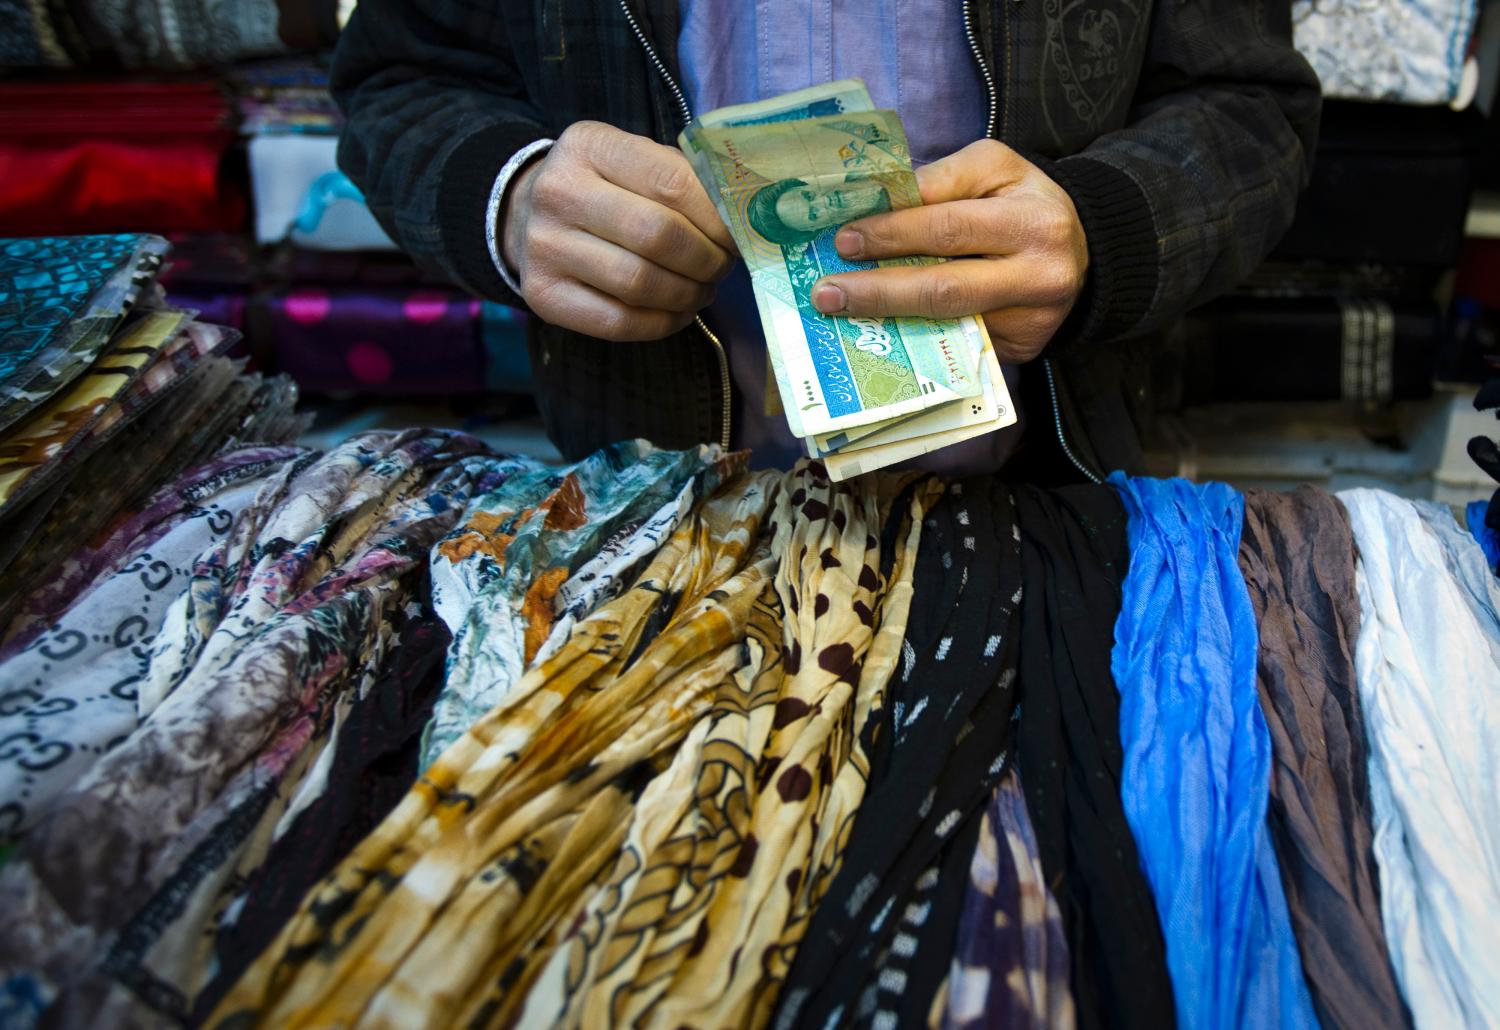 EDITORS' NOTE: Reuters and other foreign media are subject to Iranian restrictions on leaving the office to report, film or take pictures in Tehran.A shopkeeper counts Iranian bank notes at his shop in a bazar in Tehran February 25, 2012. REUTERS/Raheb Homavandi (IRAN - Tags: SOCIETY BUSINESS) - GM1E82Q02H301